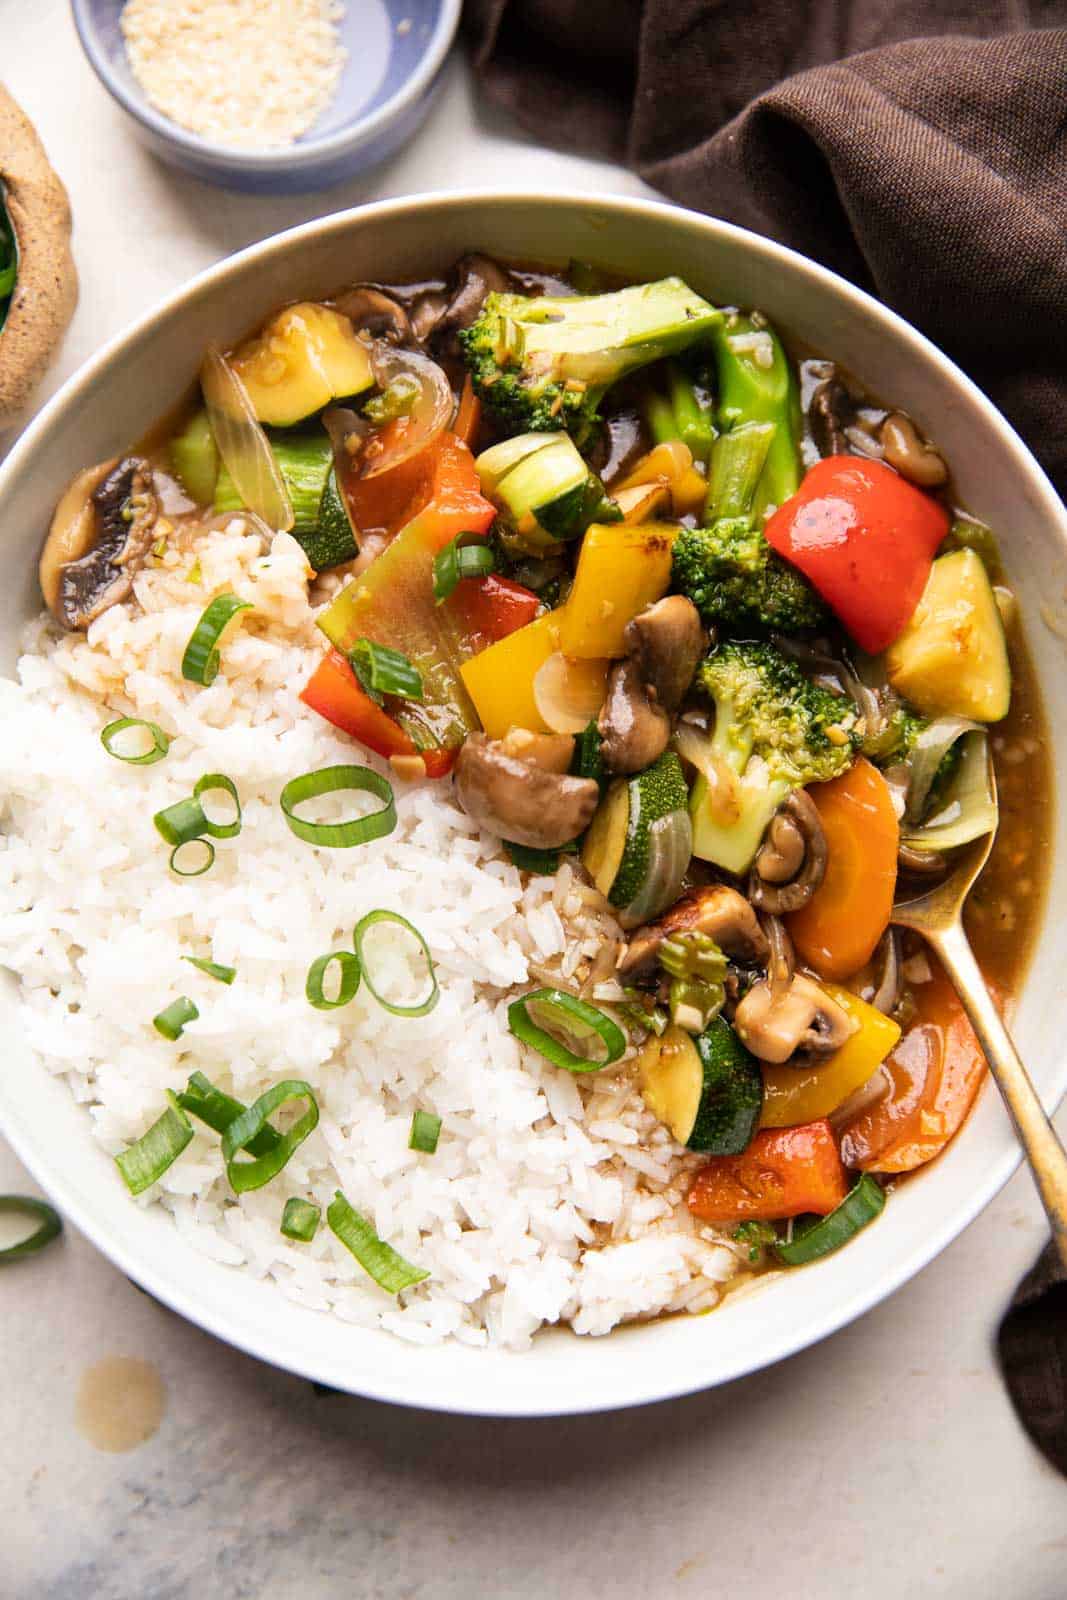 Picture of Asian Vegetable Stir Fry served with rice in a bowl